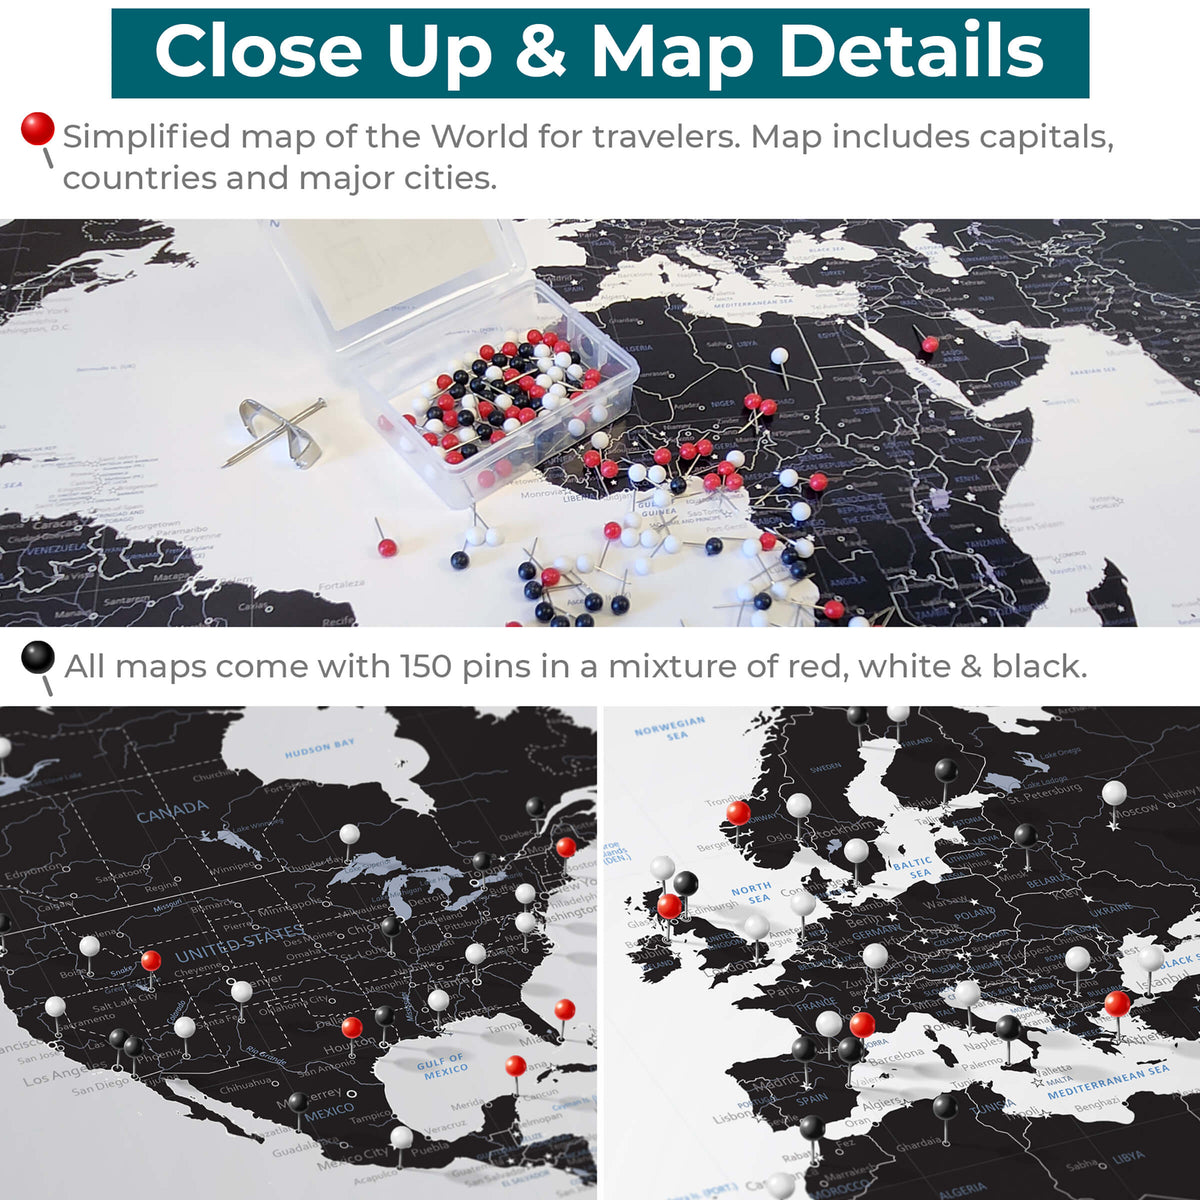 Black Ice World Push Pin Travel Maps - Close up and Details